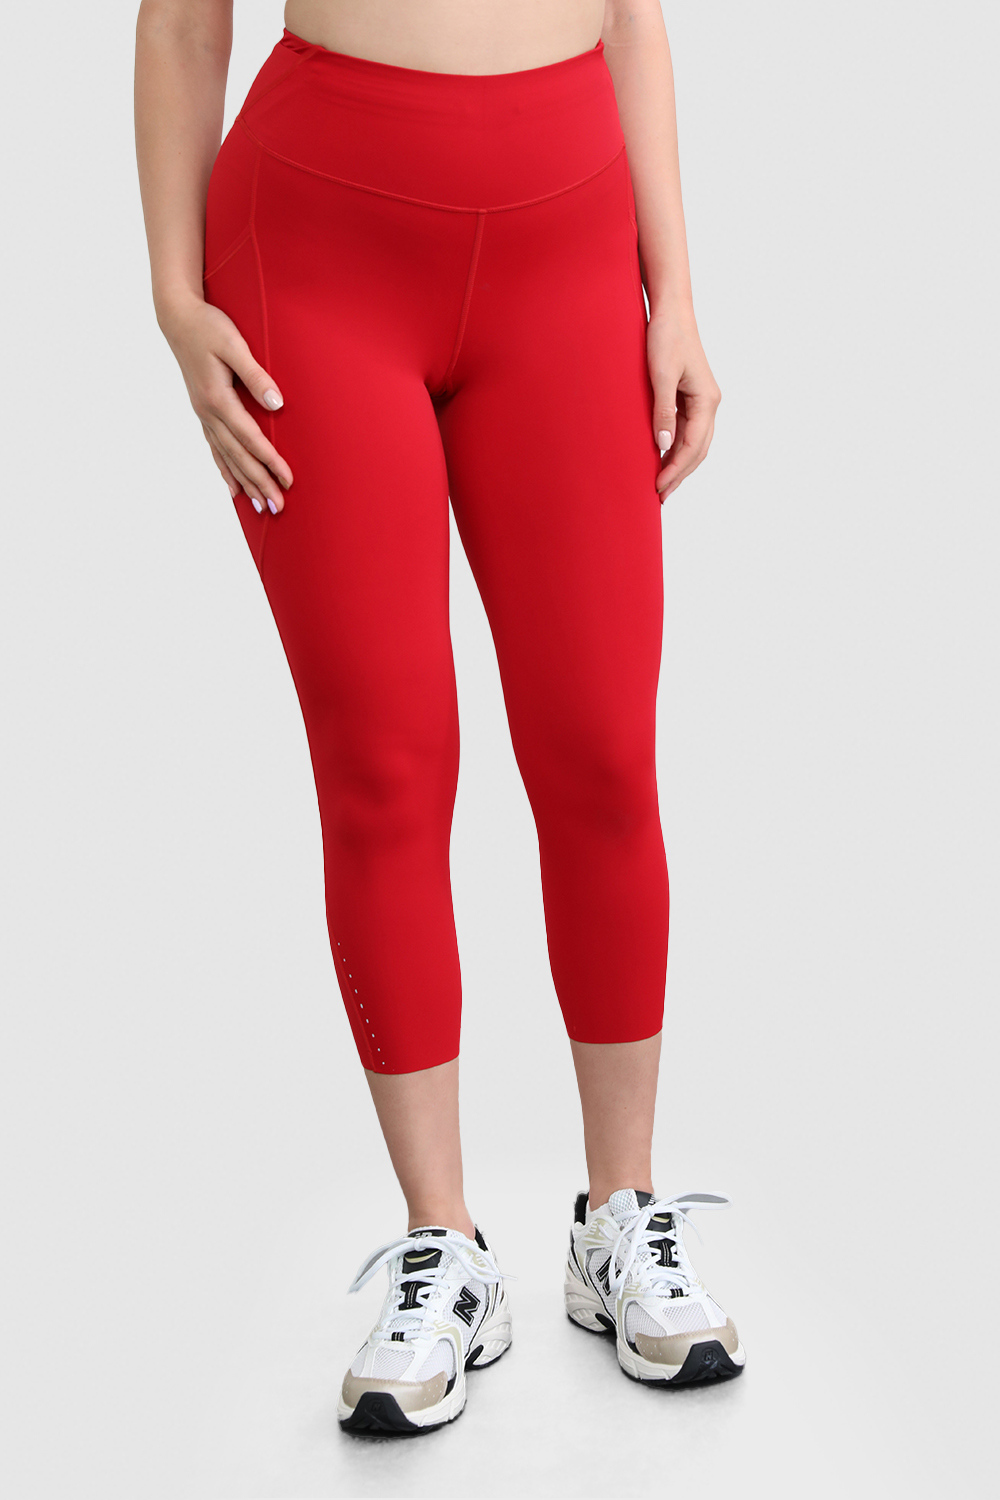 Fast and Free 2.0 Hr Crop 23Inch LULULEMON